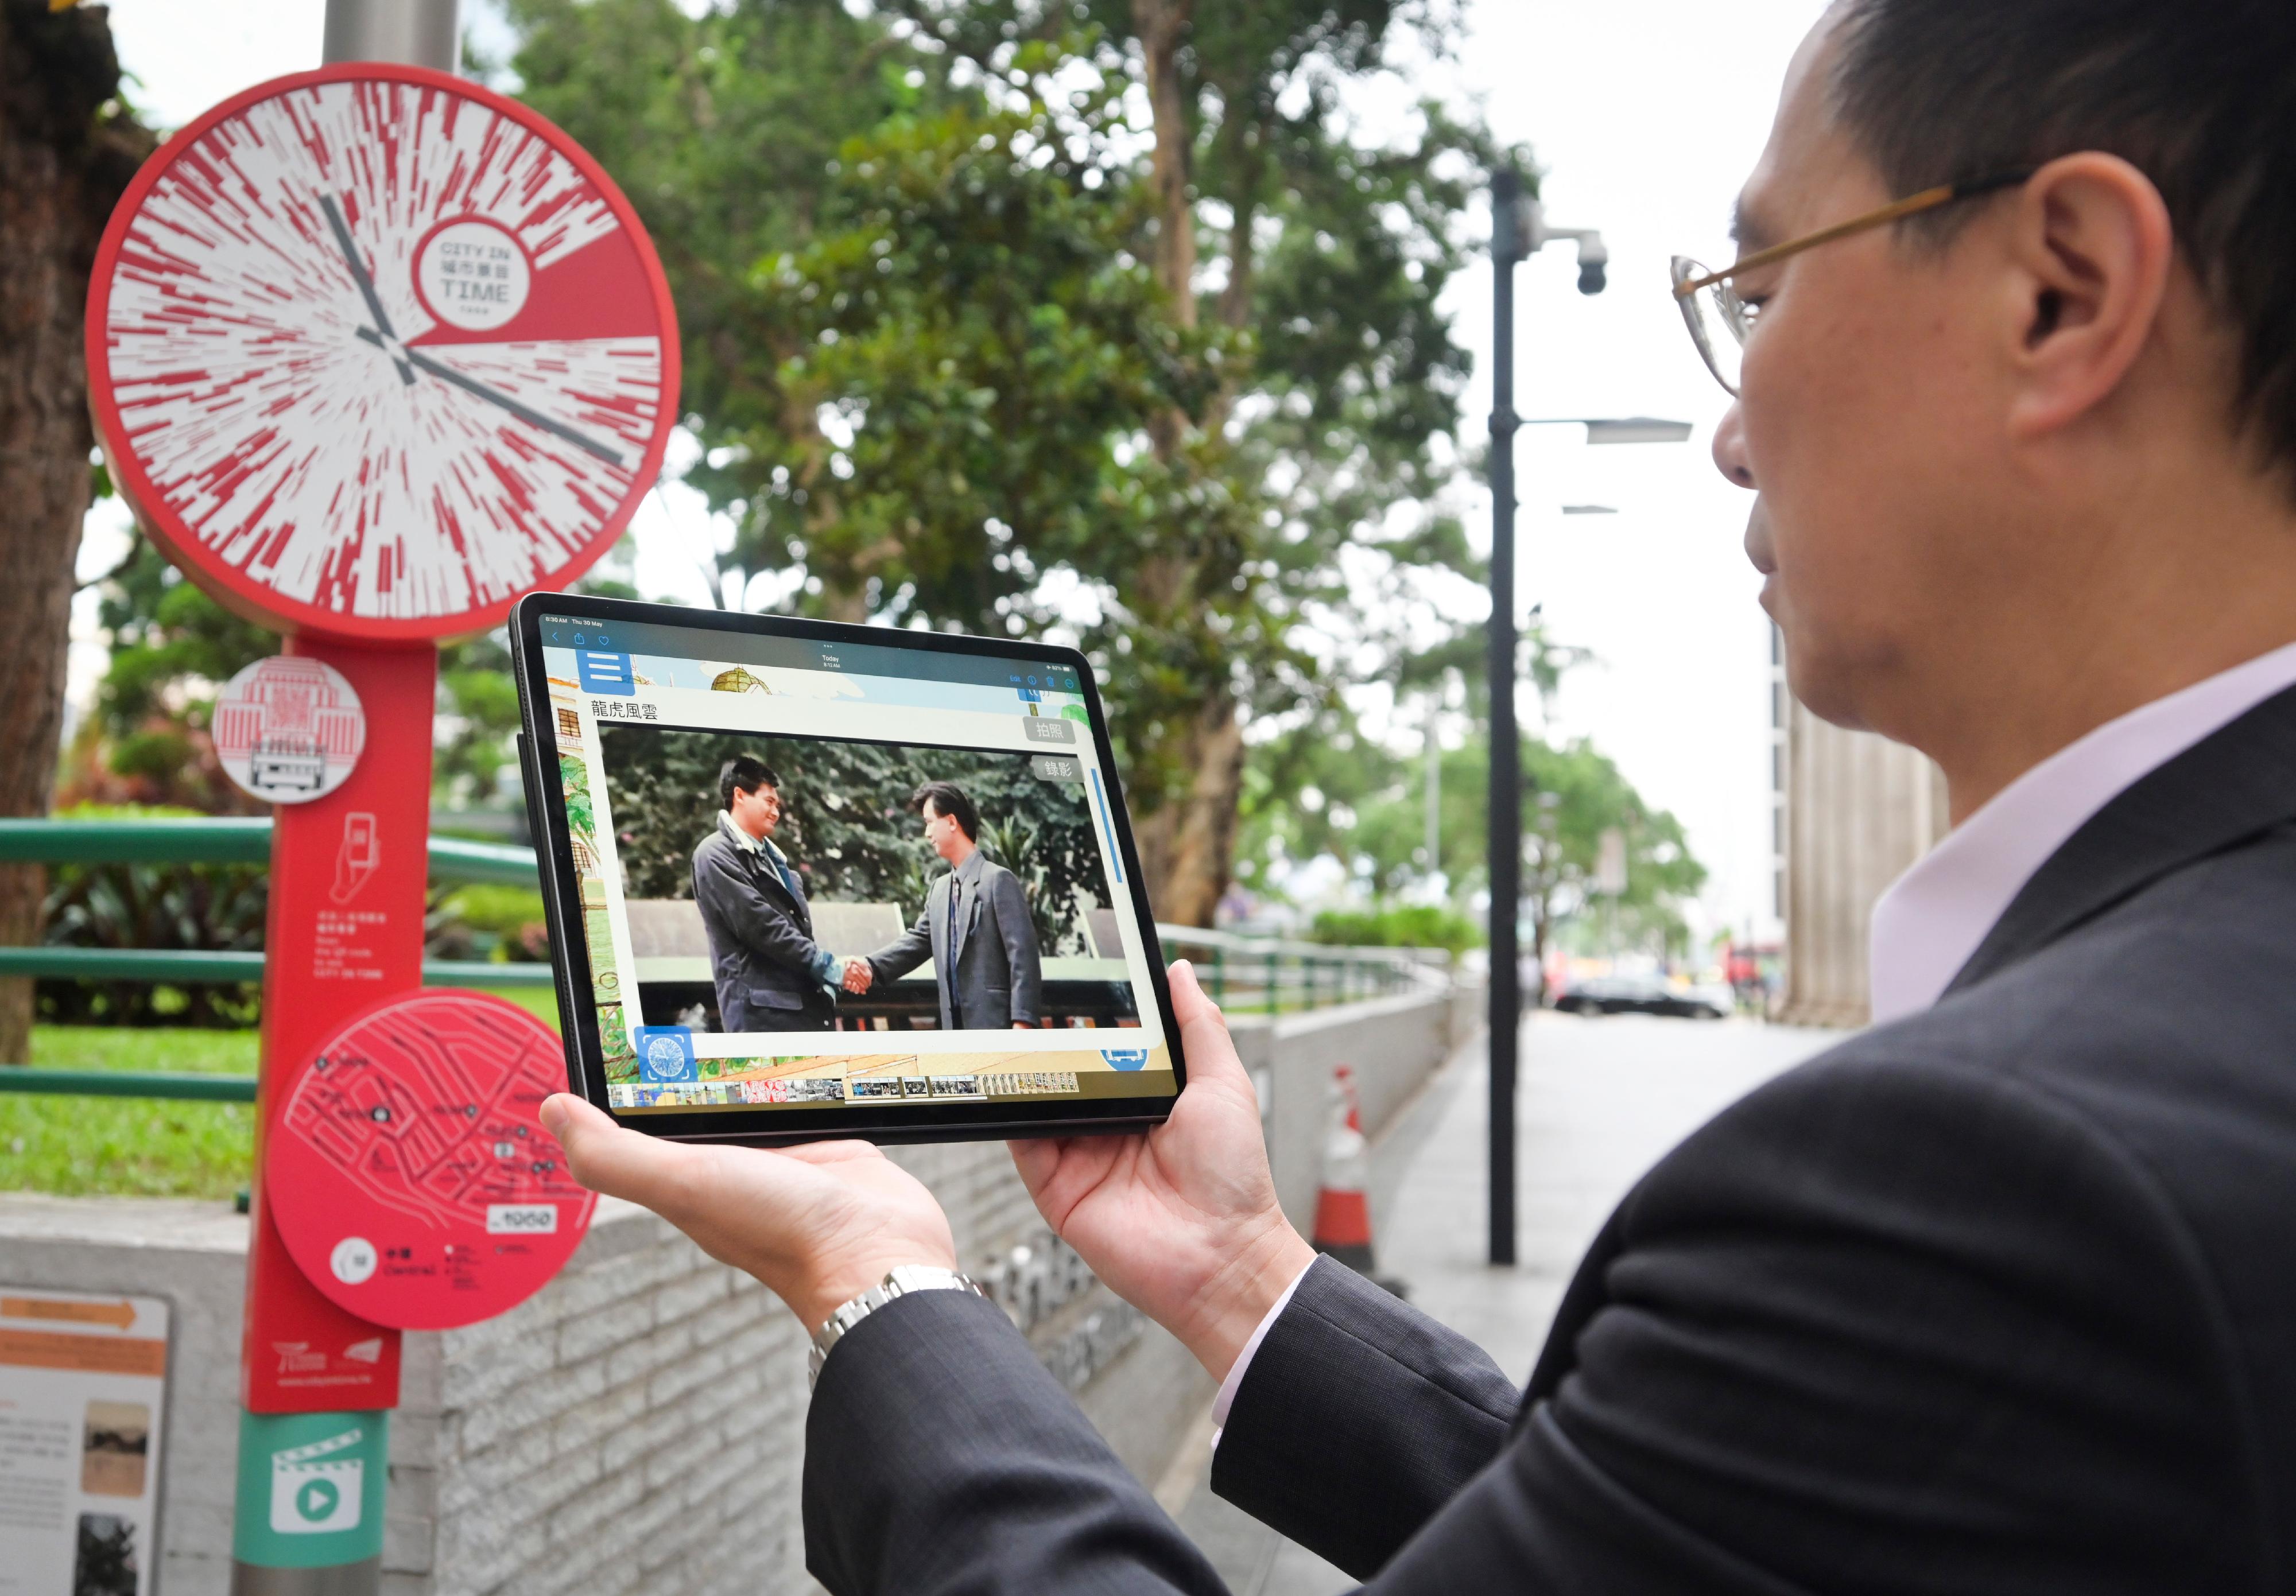  The Tourism Commission today (June 5) extended the City in Time tourism project to Lei Yue Mun and upgraded its mobile app features simultaneously to enrich the experience of both locals and tourists. The Secretary for Culture, Sports and Tourism, Mr Kevin Yeung, used a new function of the City in Time mobile app to revisit Hong Kong classic film clips at filming locations.